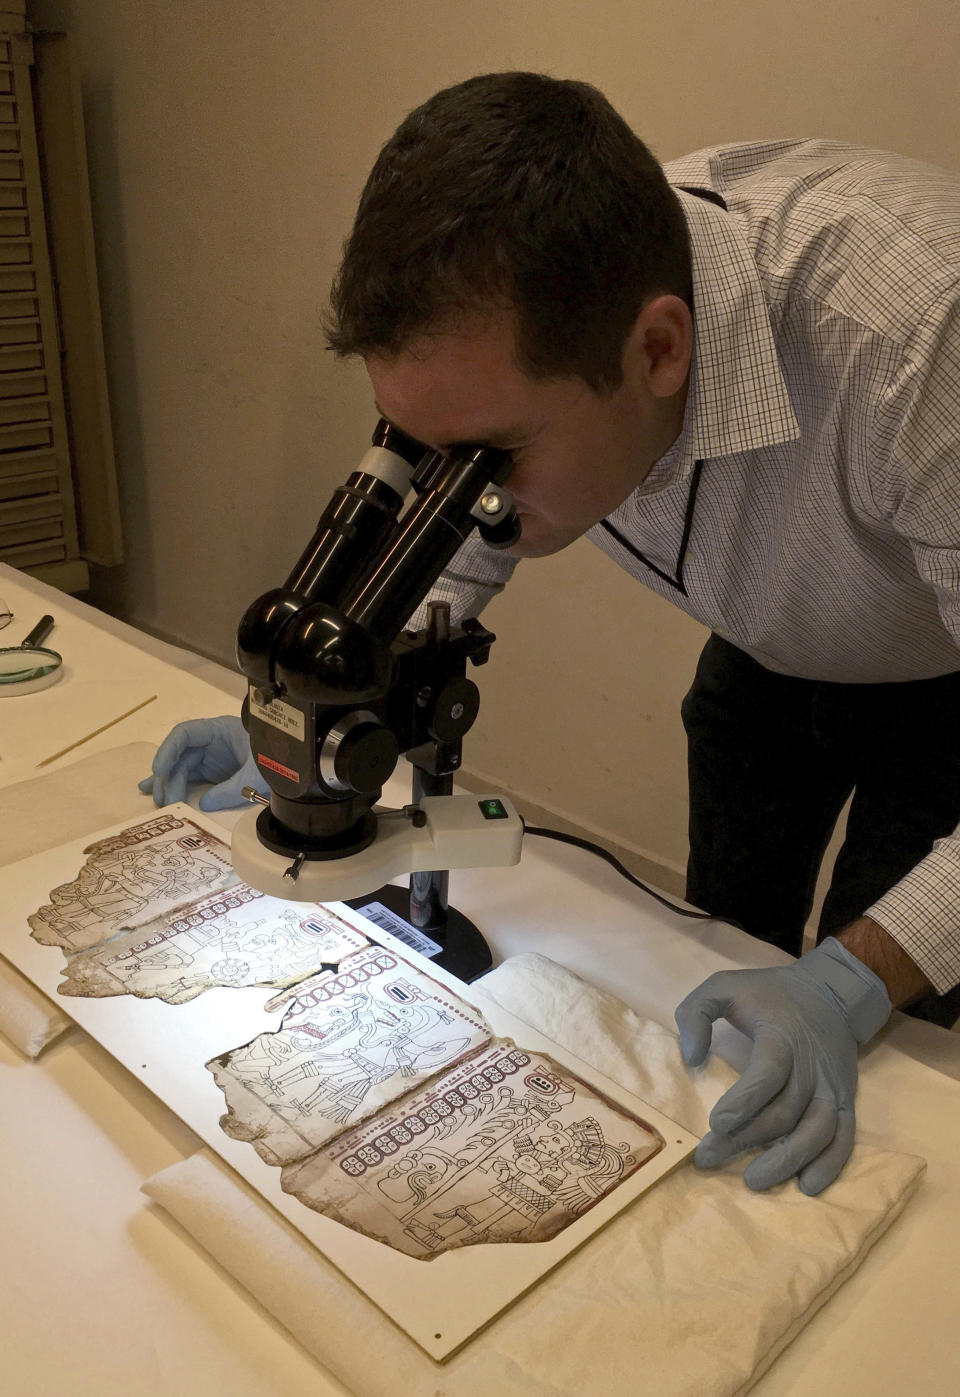 This undated photo released by Mexico's National Anthropology and History Institute (INAH) shows a worker inspecting an ancient Maya pictographic text in Mexico City. The INAH says the text was made between 1021 and 1154 A.D., is the oldest known pre-Hispanic text, and will now be known as the "Mexico Maya Codex." (INAH via AP)